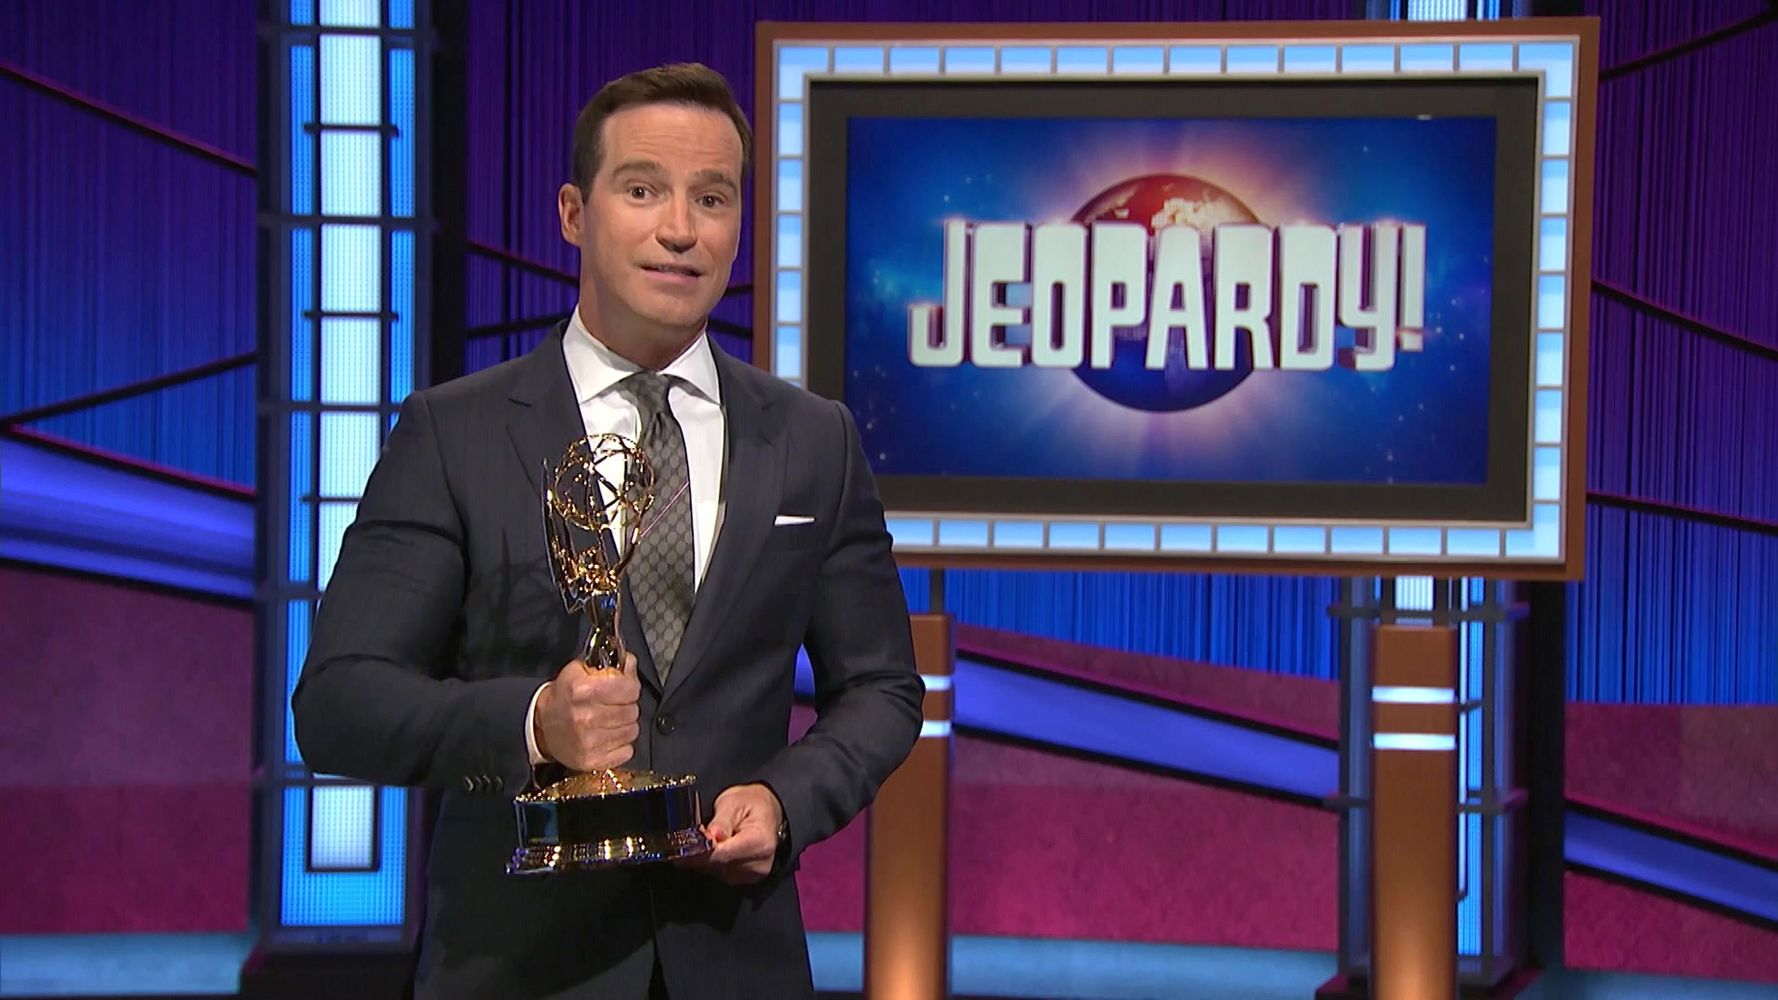 So The 'Jeopardy!' Guest Host Rotation Was Apparently All For Show